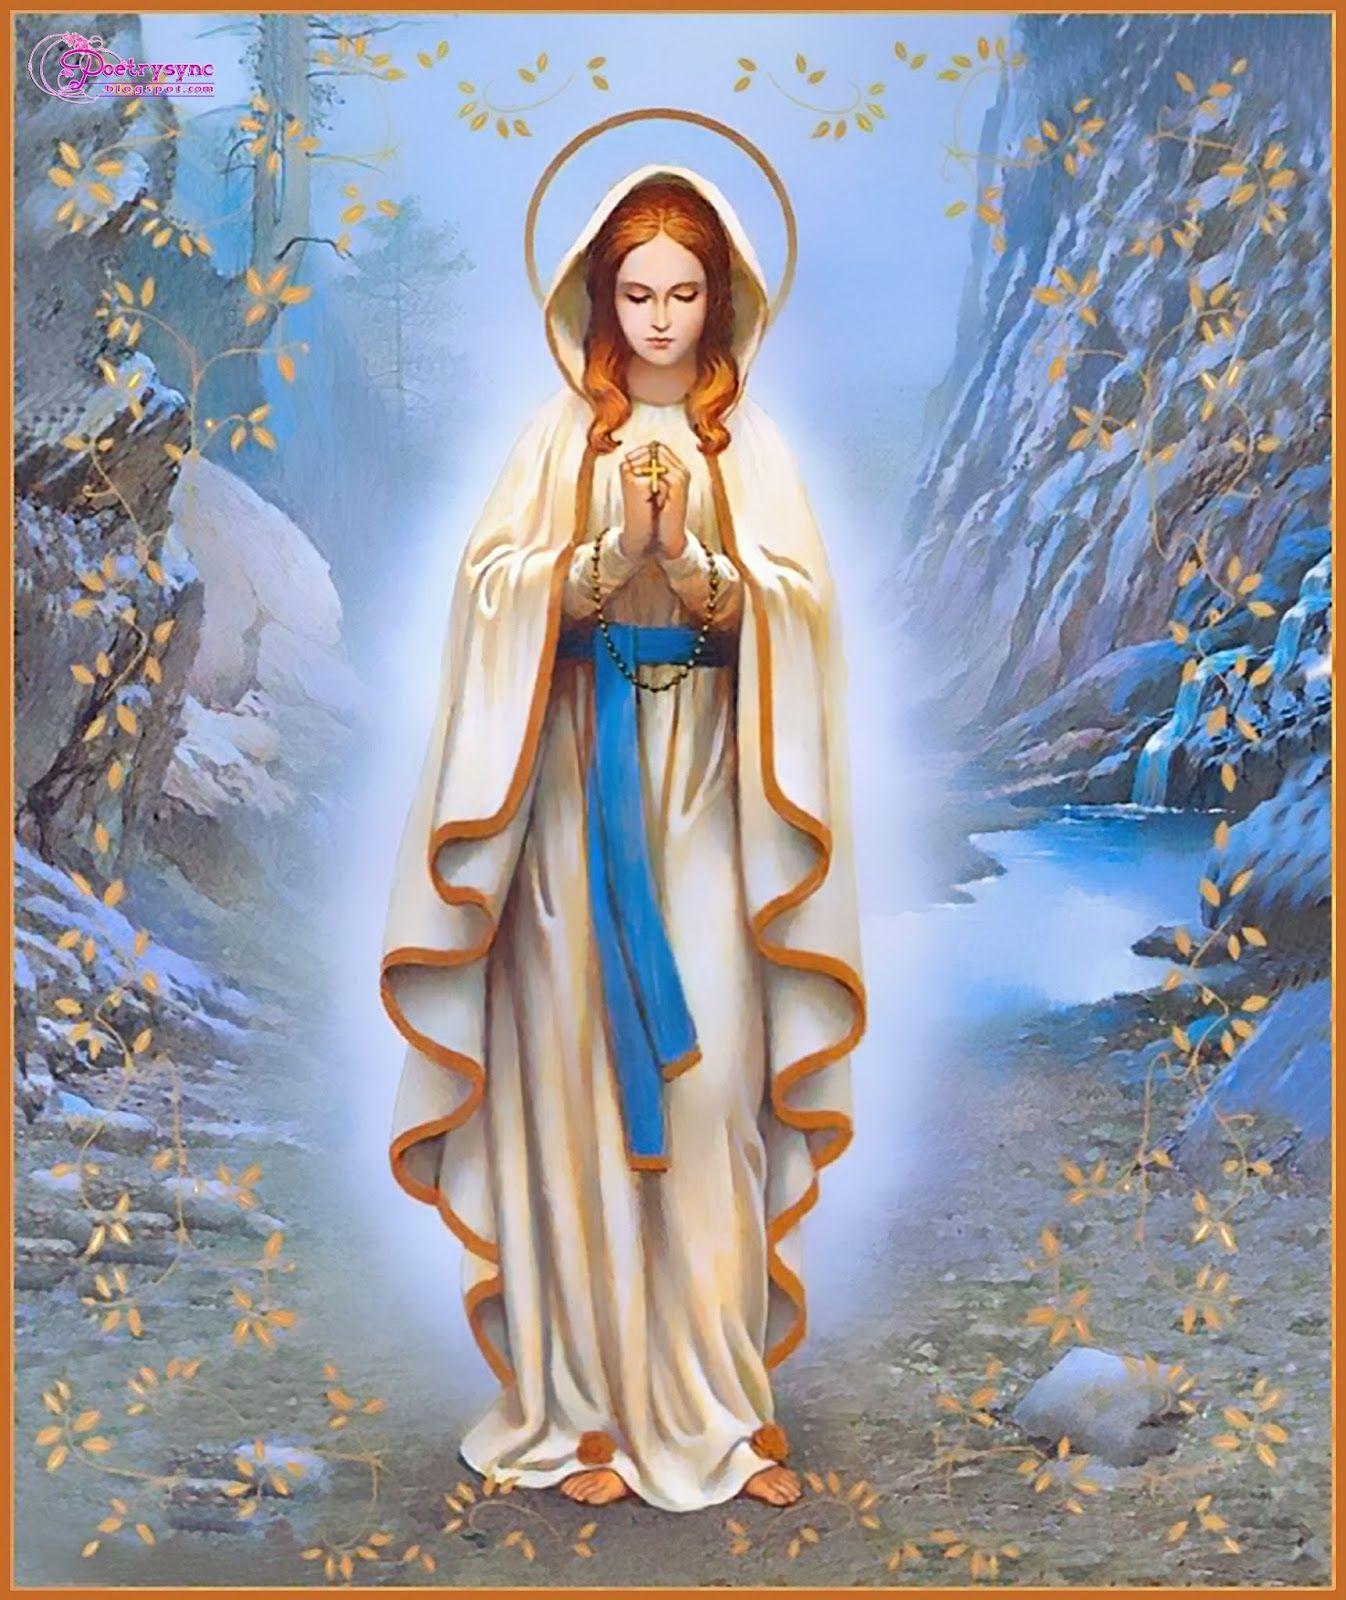 Blessed Virgin Mary. Virgin Mary Picture and Wallpaper Feast